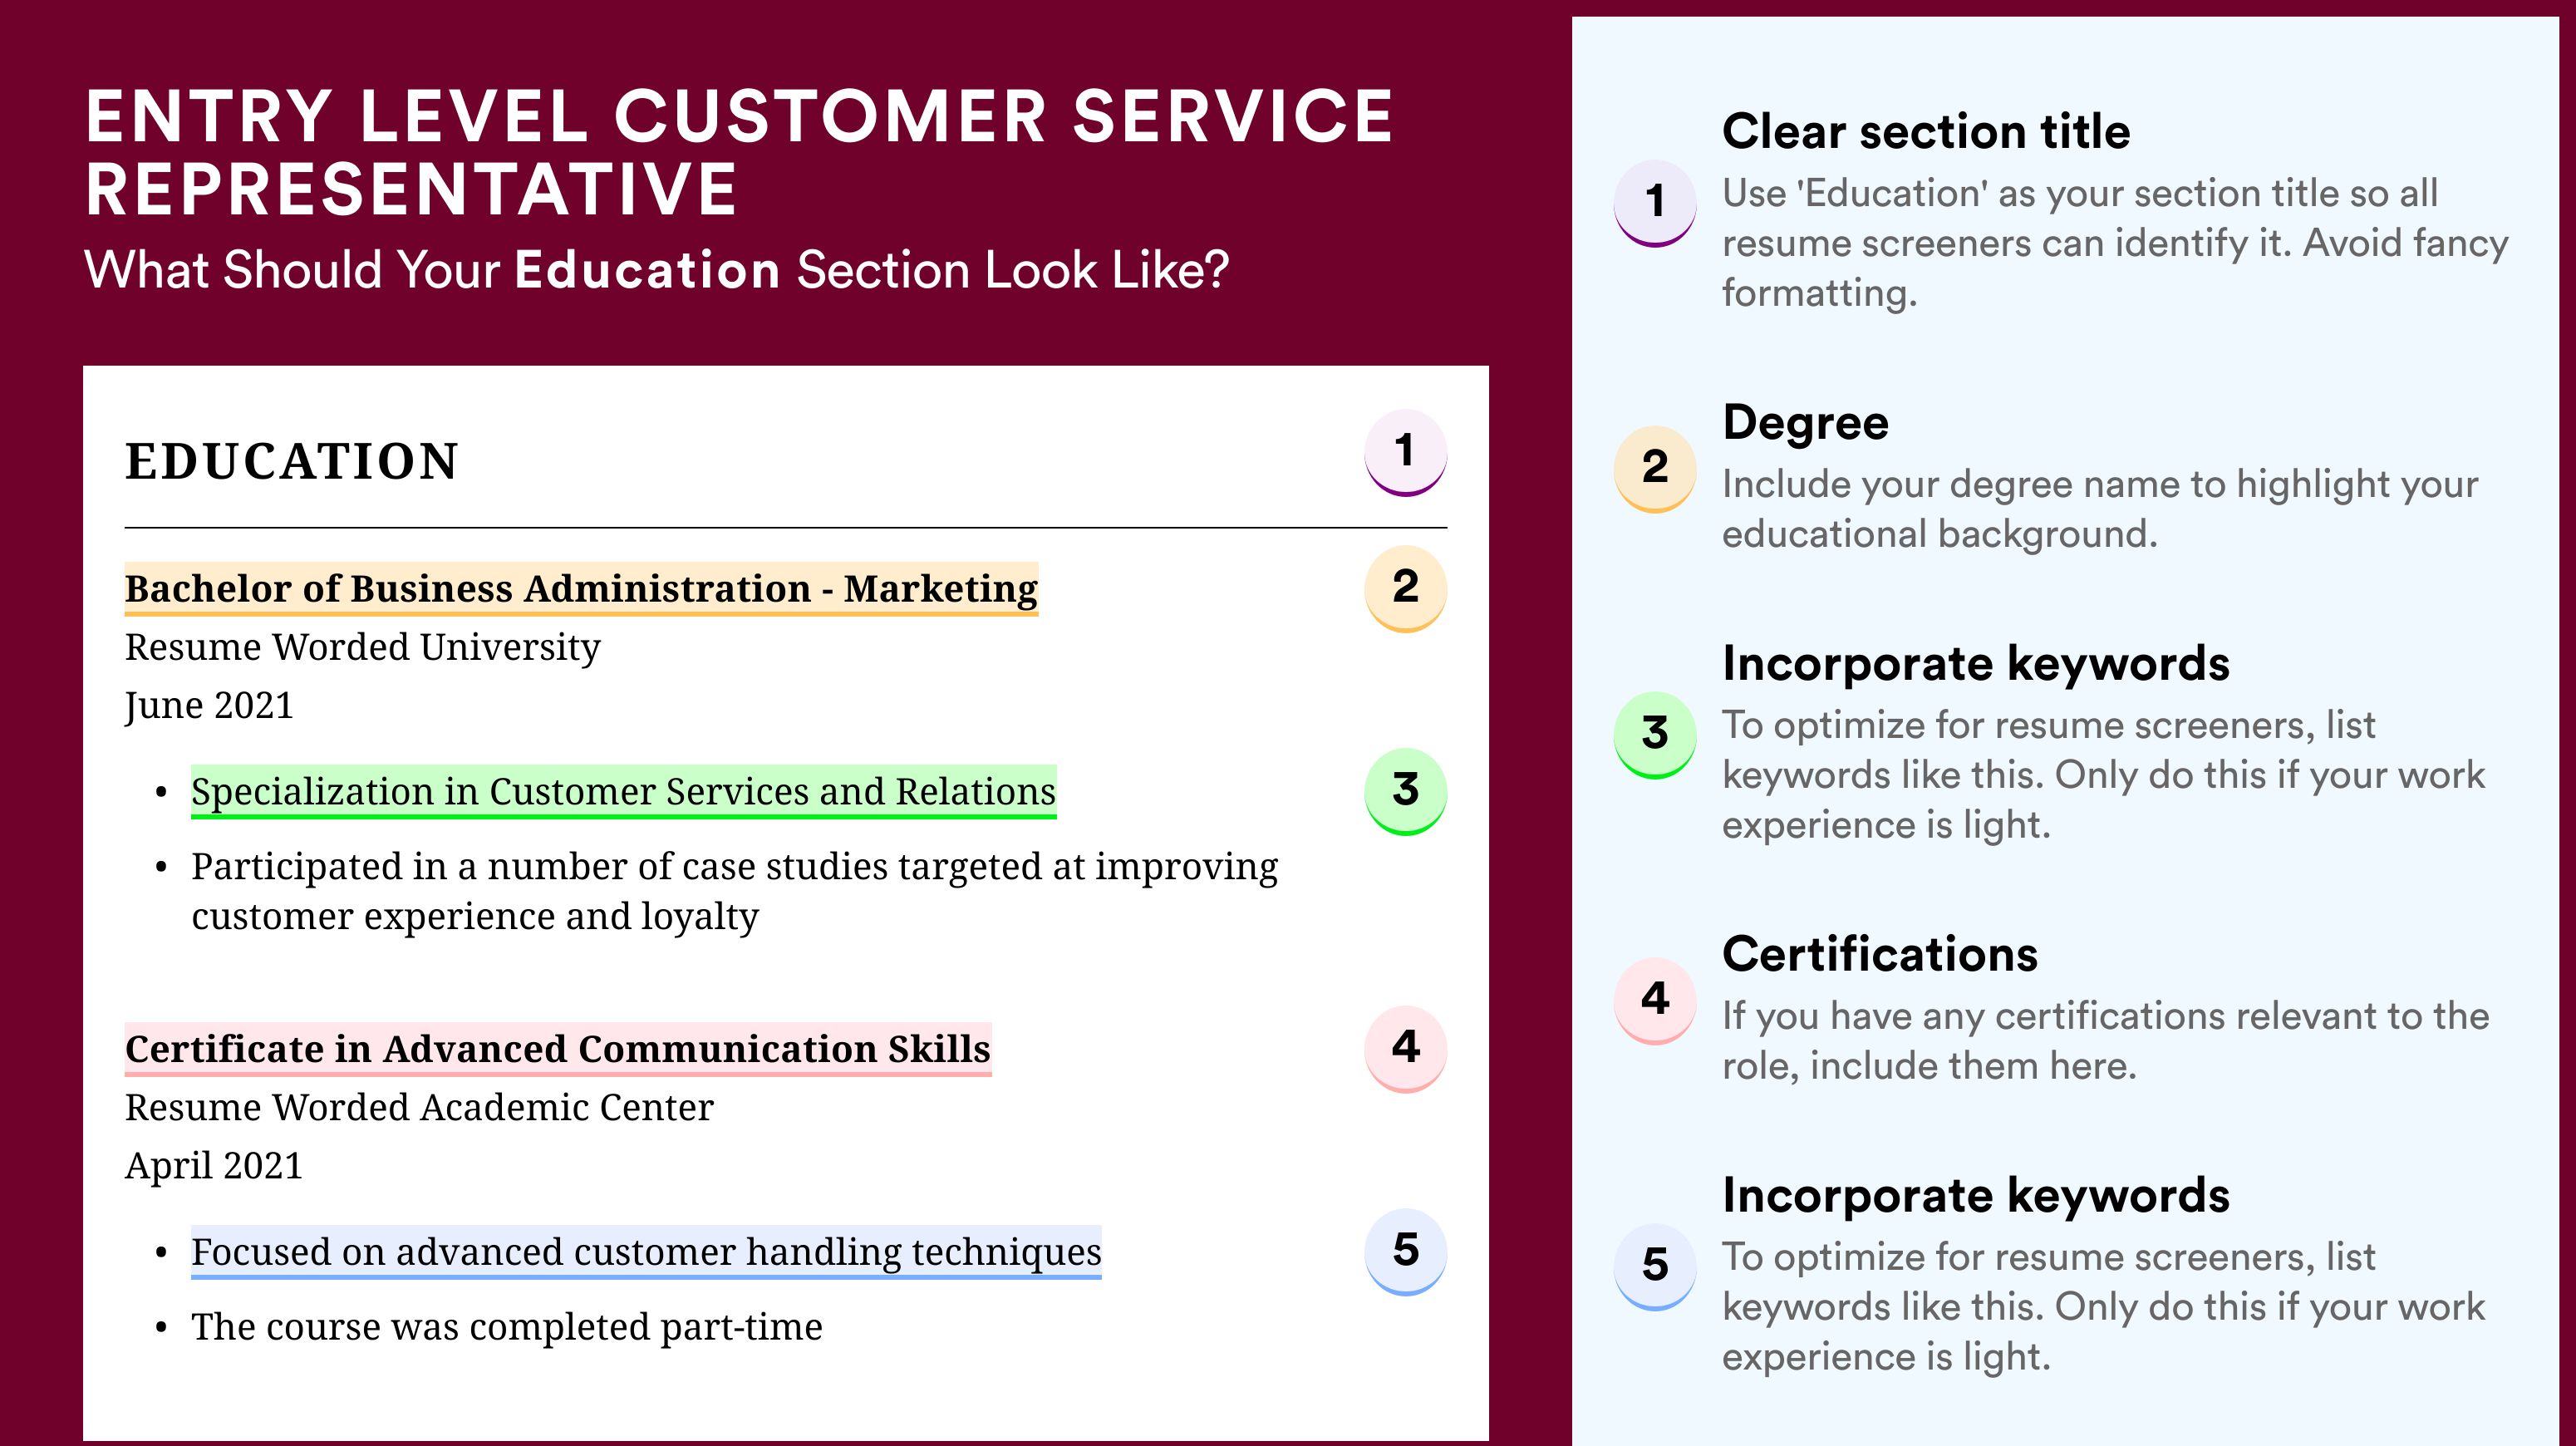 How To Write An Education Section - Entry Level Customer Service Representative Roles